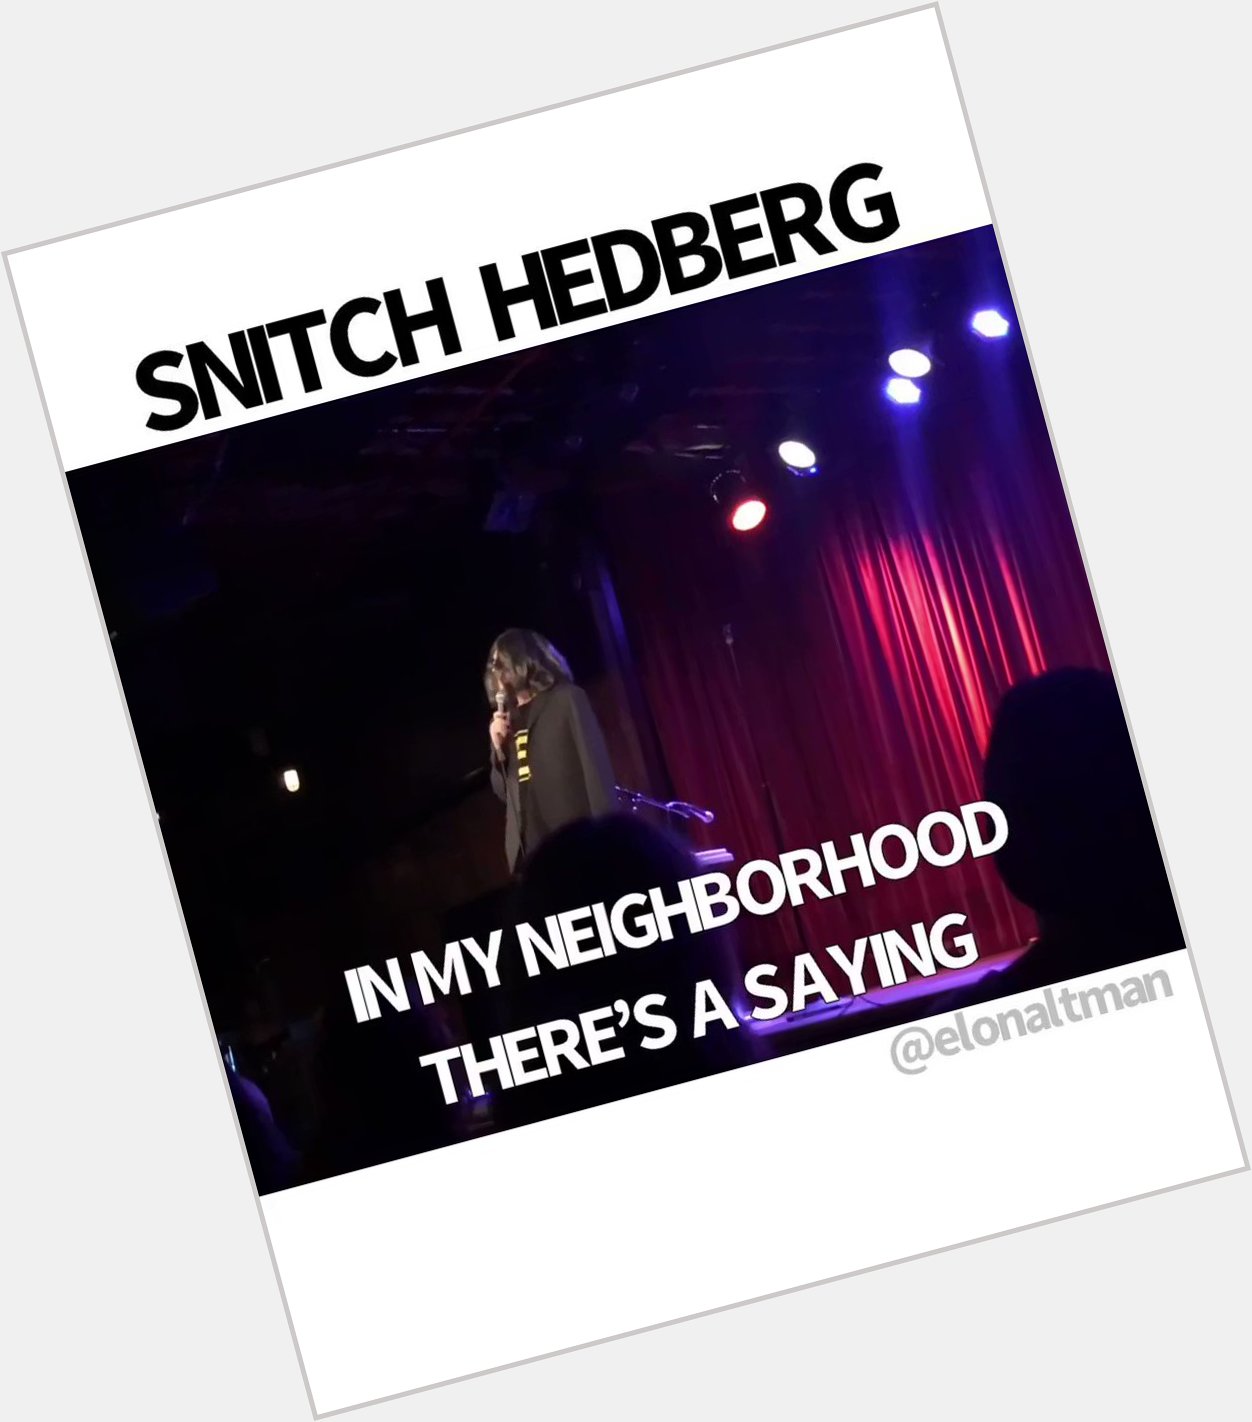 Happy birthday Mitch Hedberg! Here s me doing Snitch Hedberg, the Mitch who rats on his friends. 